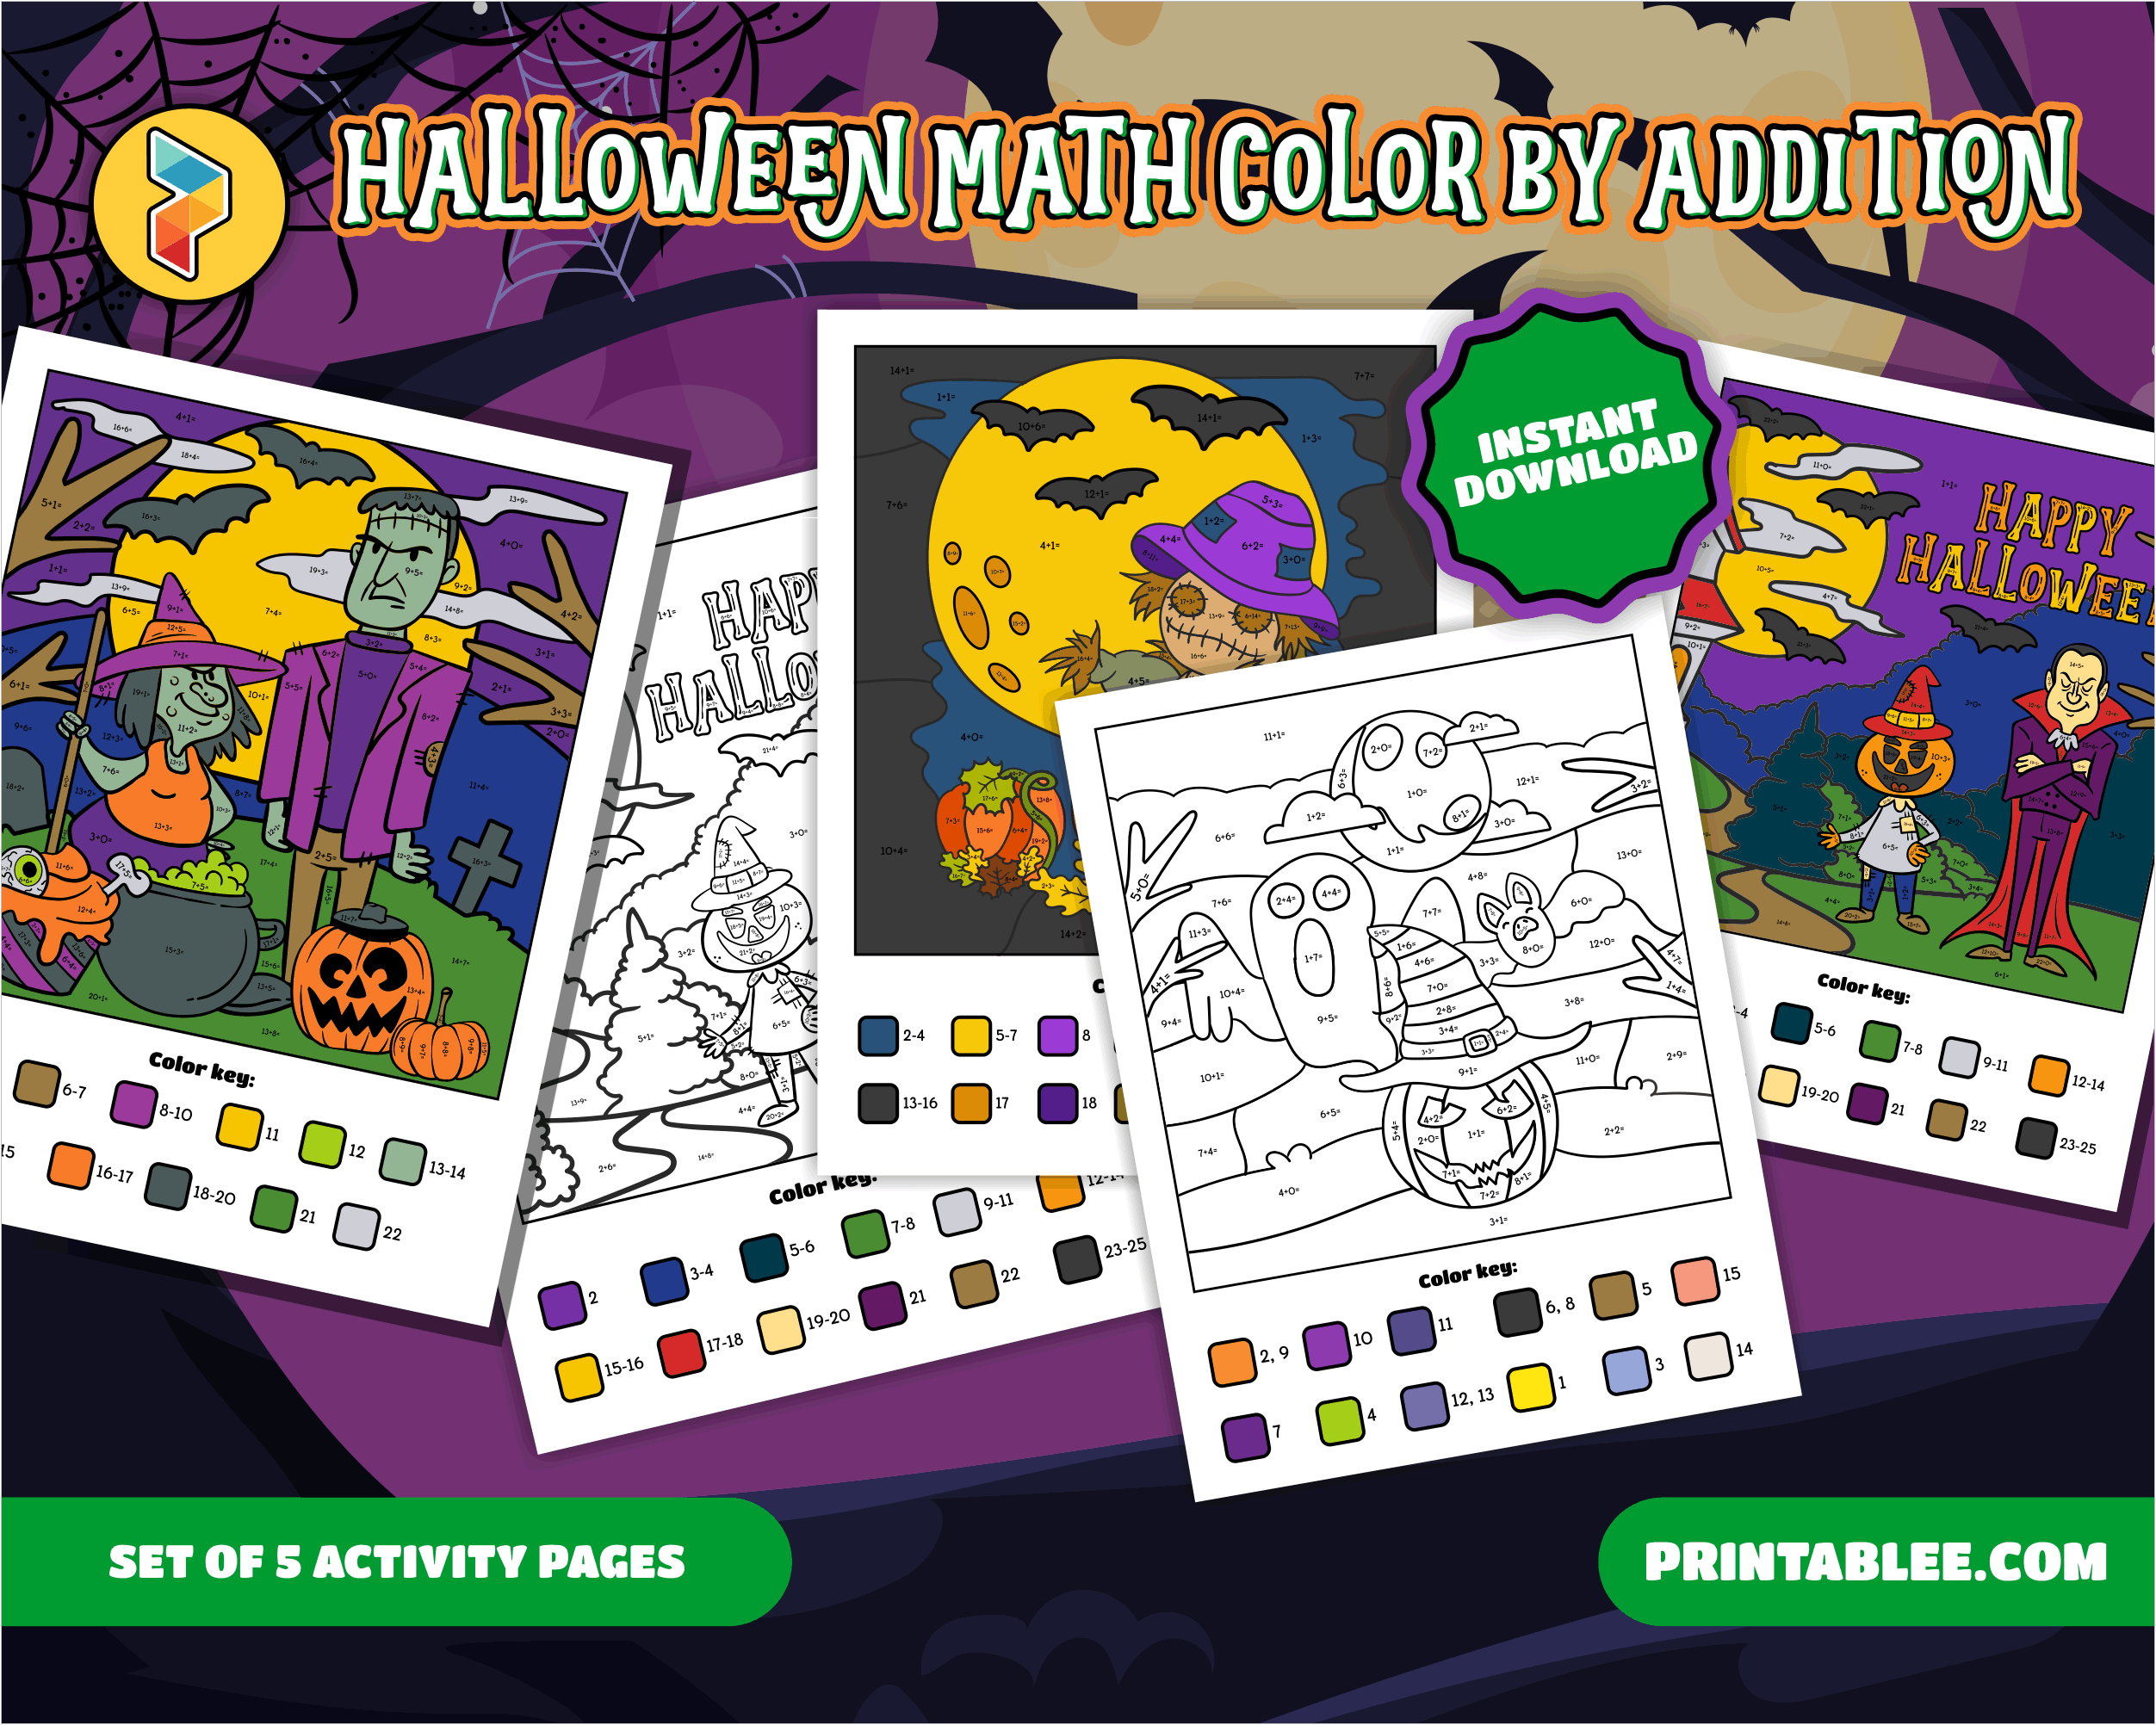 Printable Halloween Activity for Kids - Color by Number Addition | Halloween Math Color by Addition